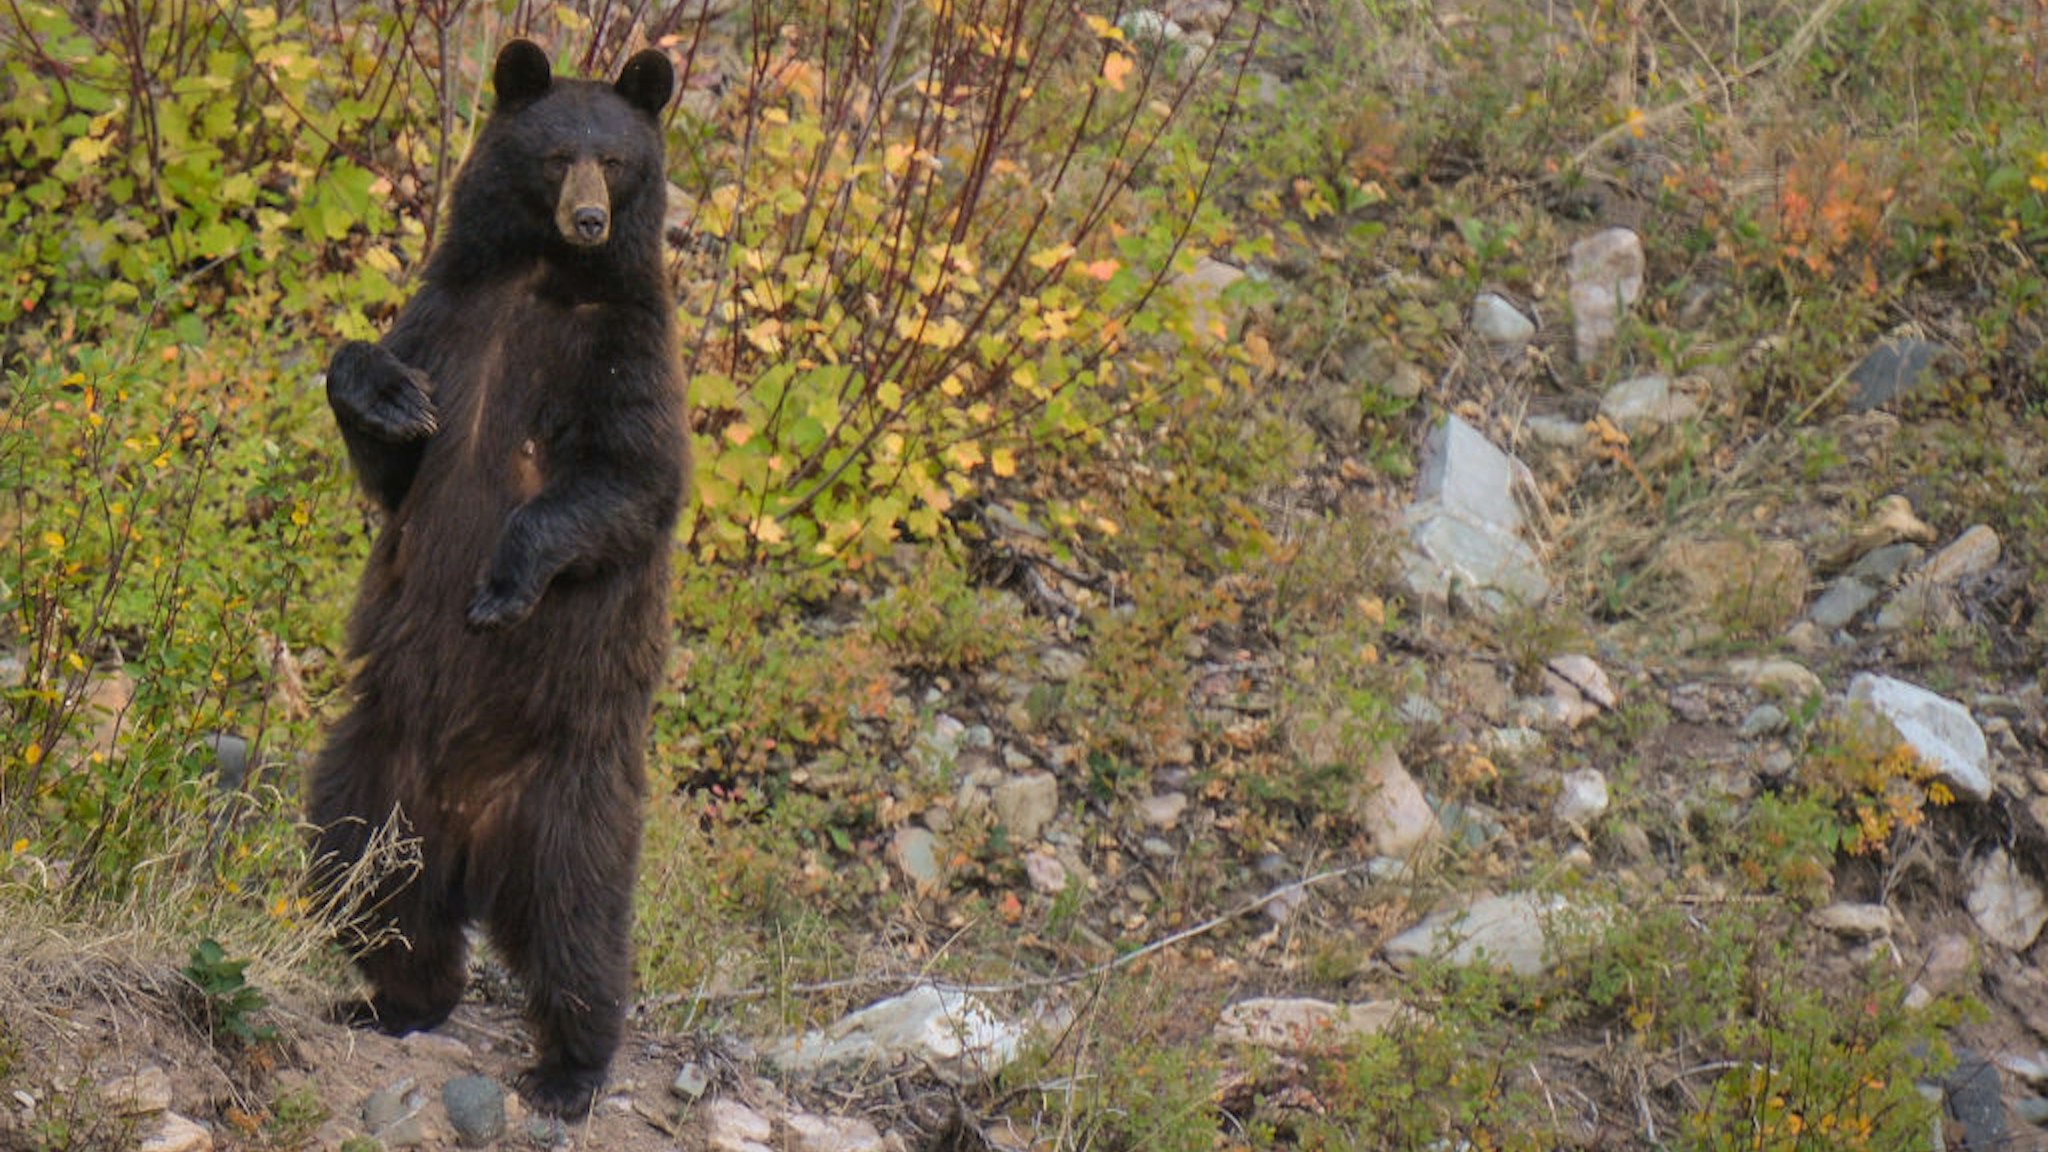 American black bear seen along the Red Rock Parkway inside Waterton Lakes National Park. On Tuesday, 5 October 2021, in Waterton, Alberta, Canada. (Photo by Artur Widak/NurPhoto via Getty Images)